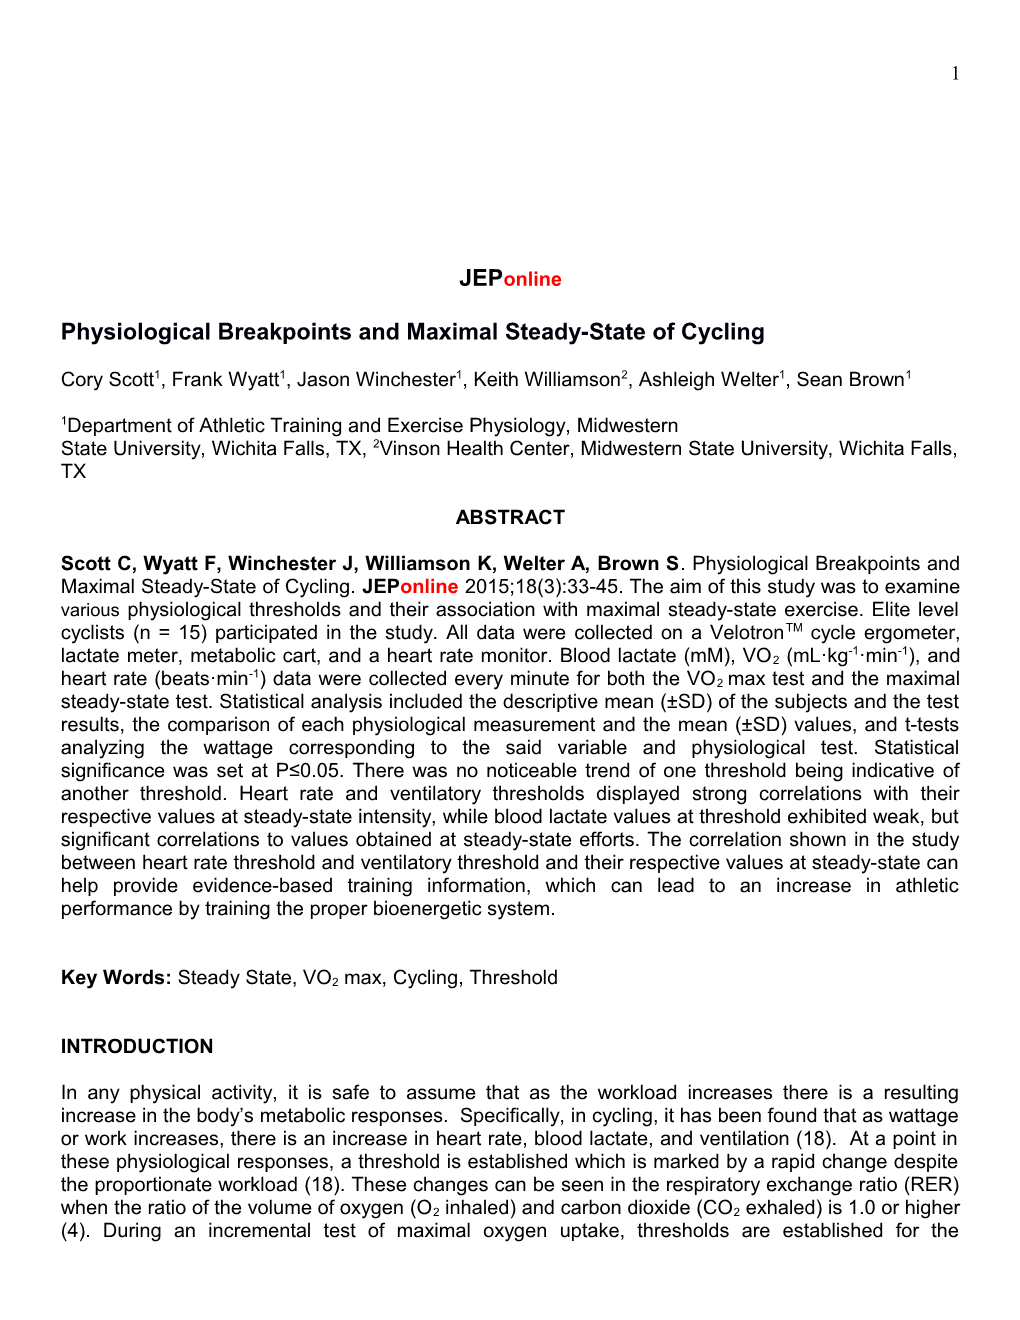 Physiological Breakpoints and Maximal Steady-State of Cycling